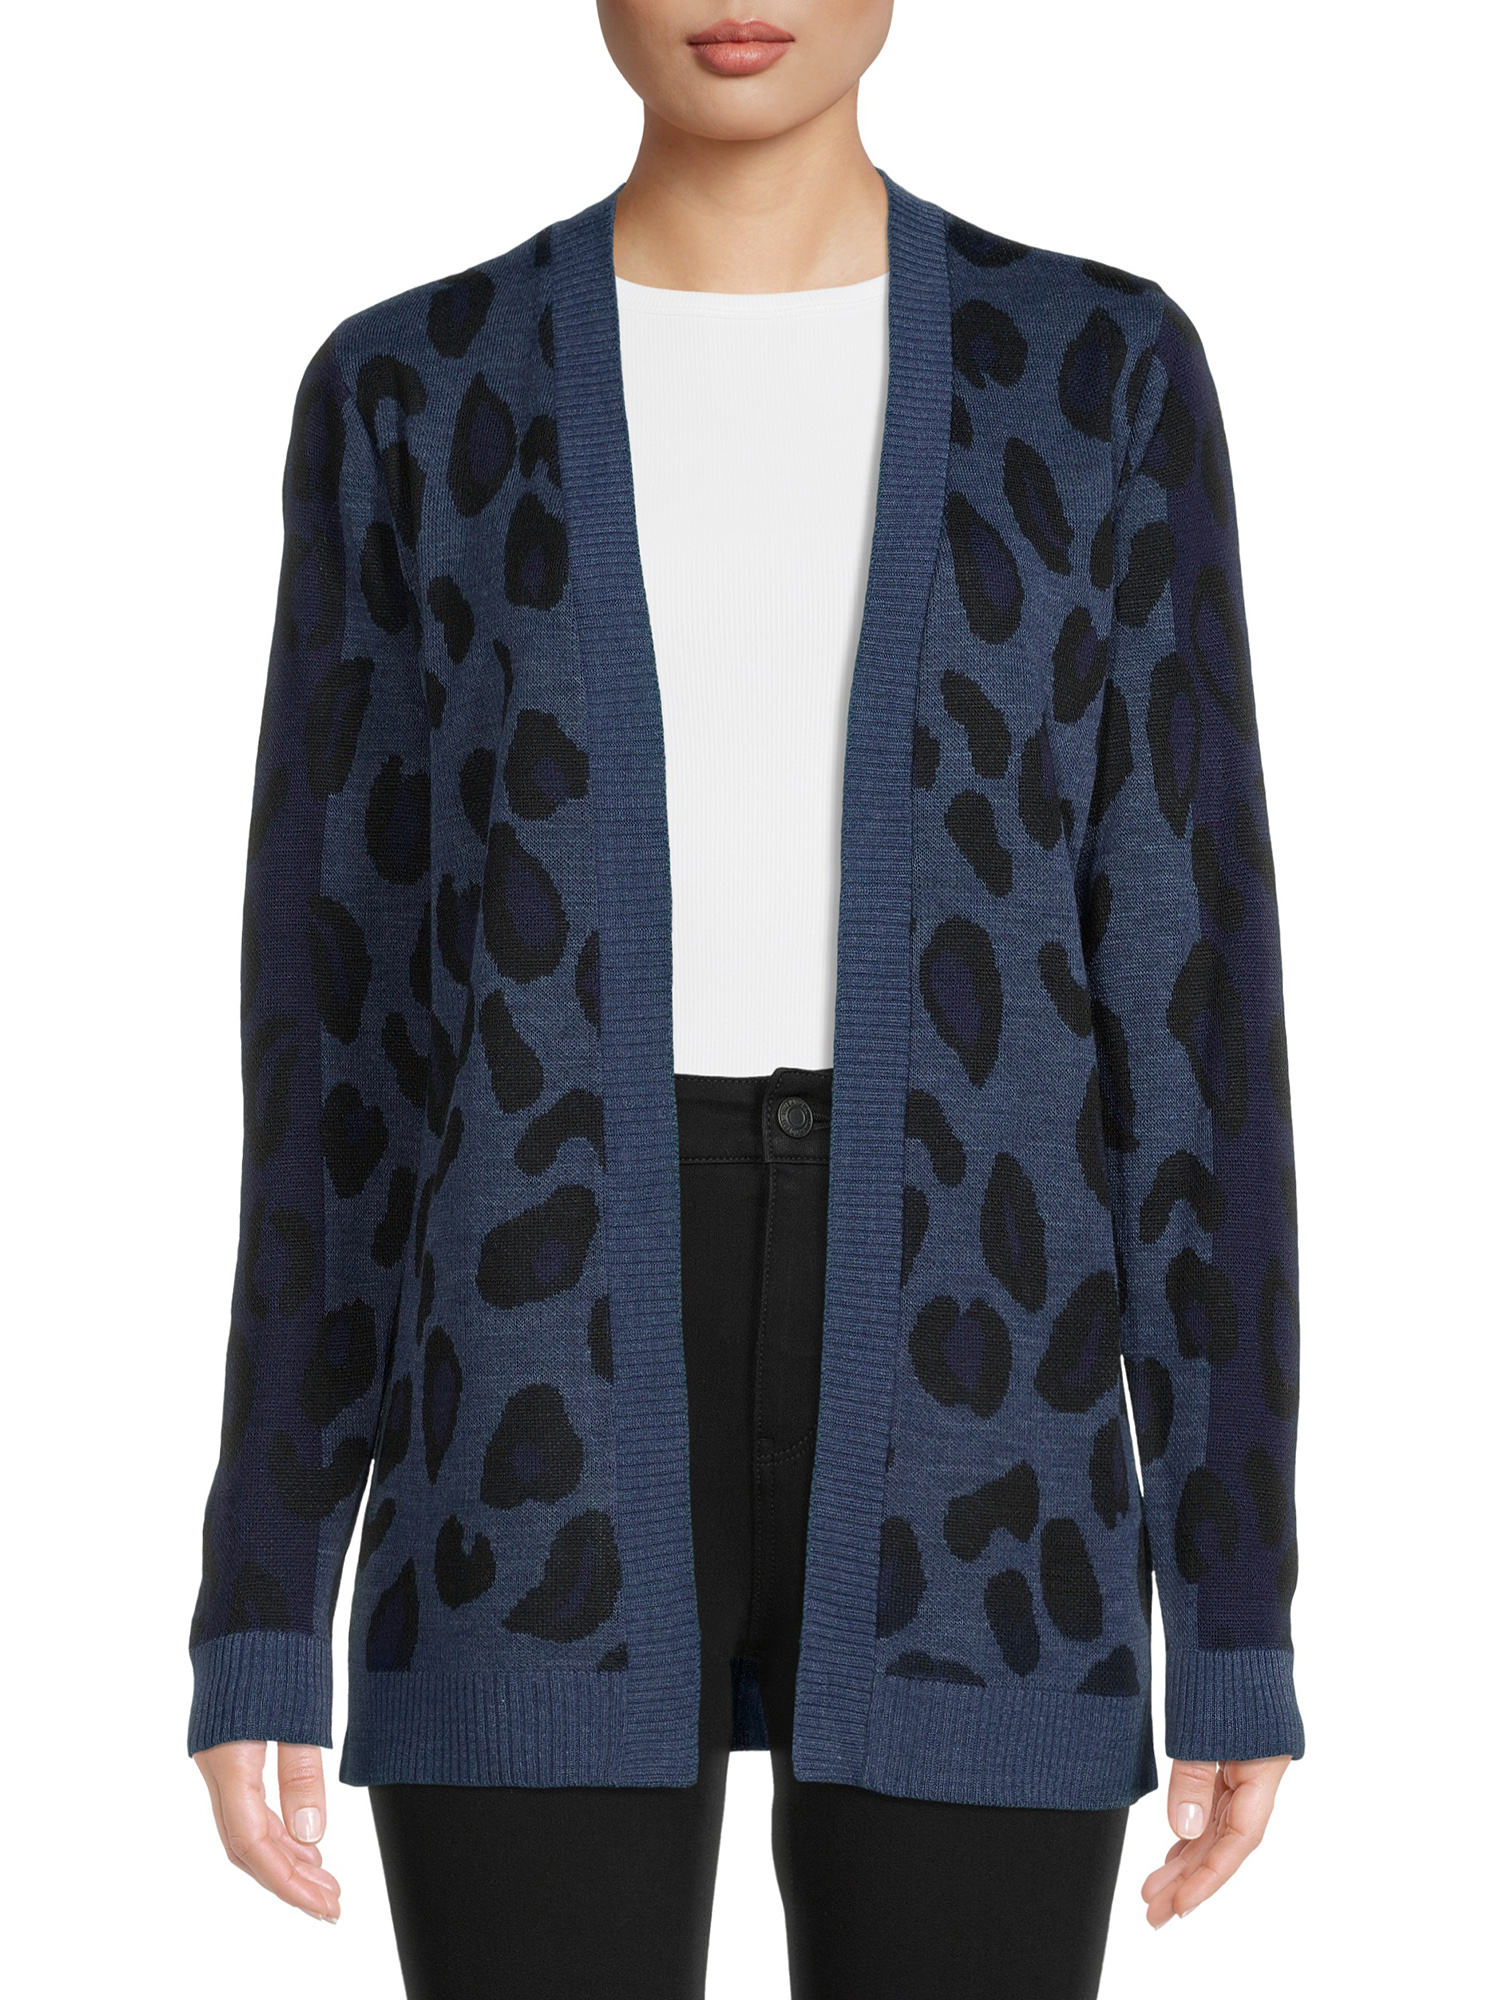 Time and Tru Women's Open Front Animal Cardigan - image 1 of 5